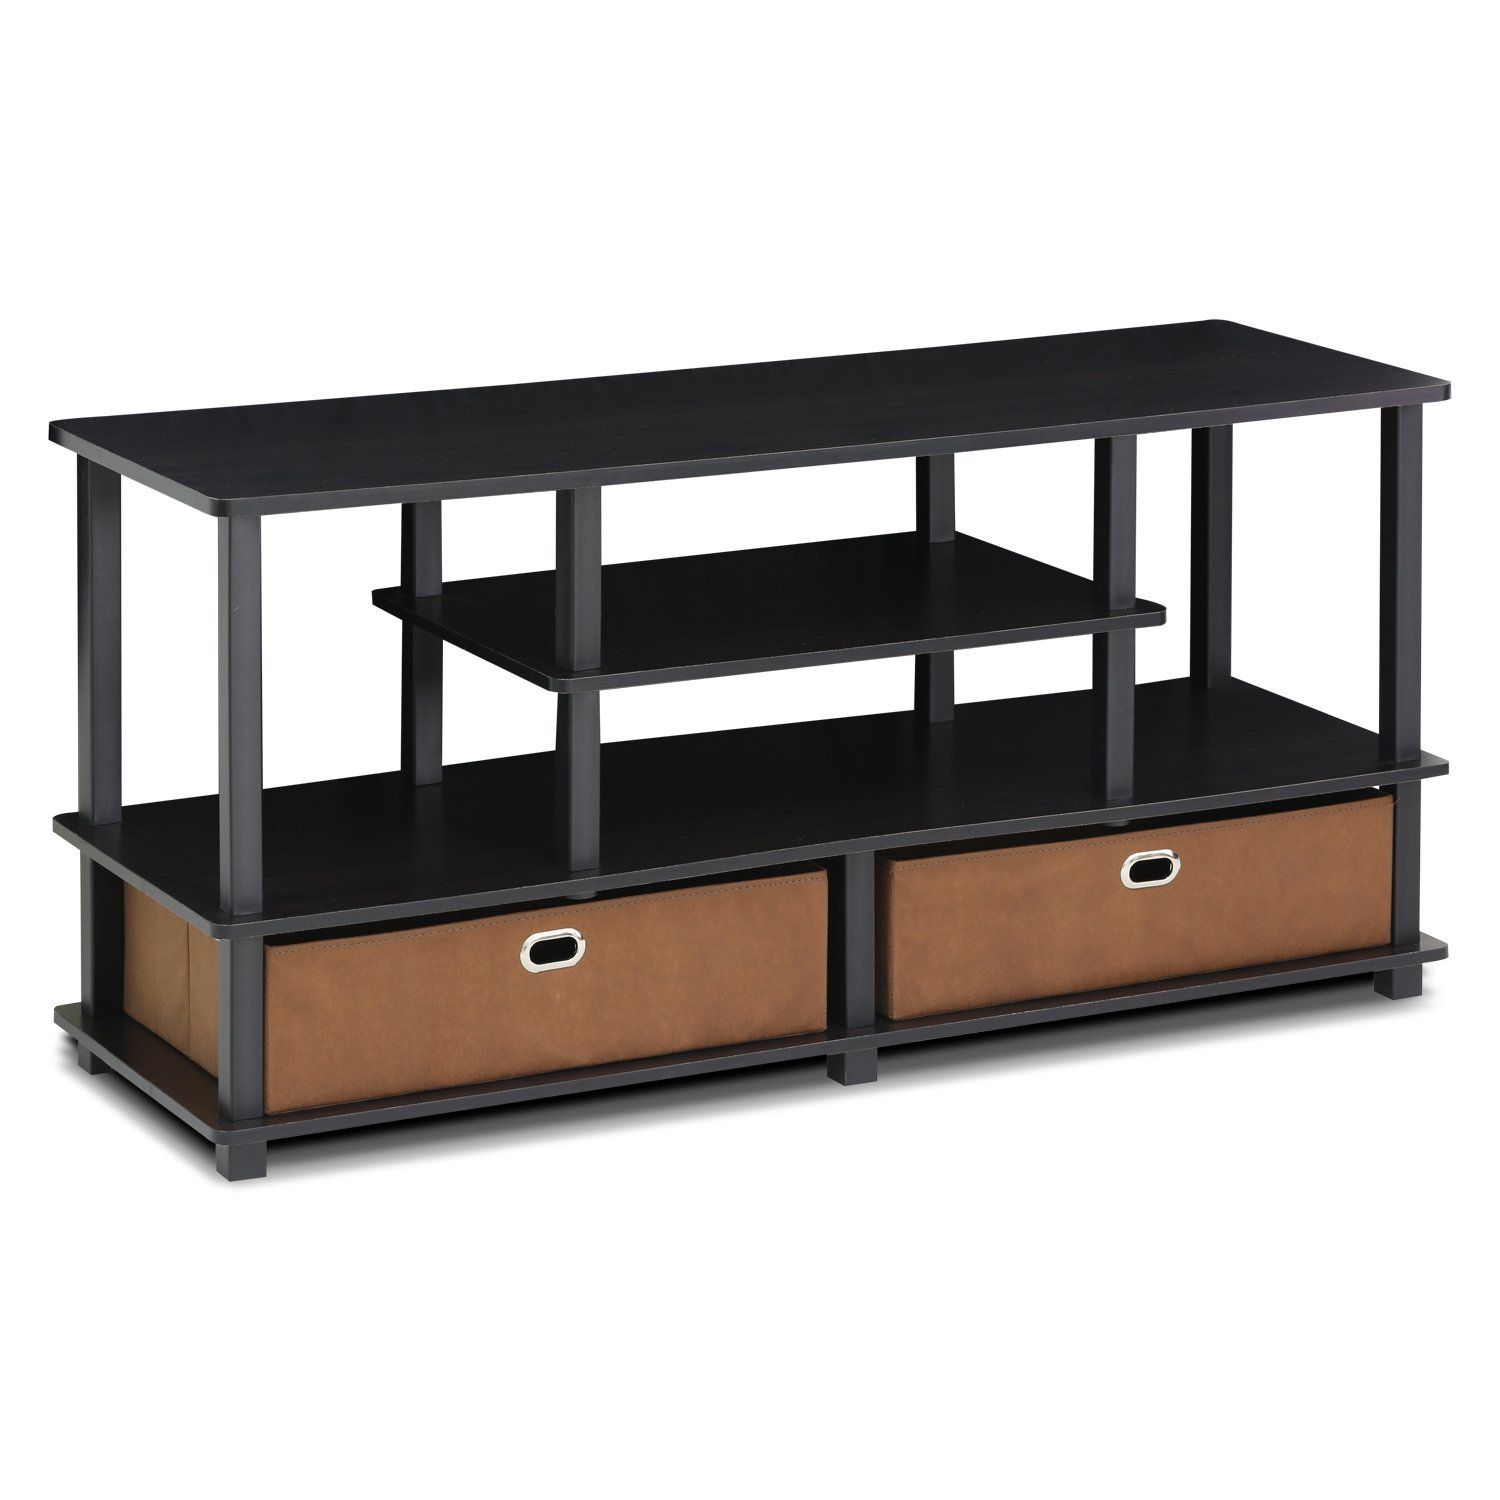 Furinno 15119exbkbr Jaya, Large Tv Stand For Up To 50 Inch Pertaining To Furinno Jaya Large Entertainment Center Tv Stands (Photo 2 of 15)